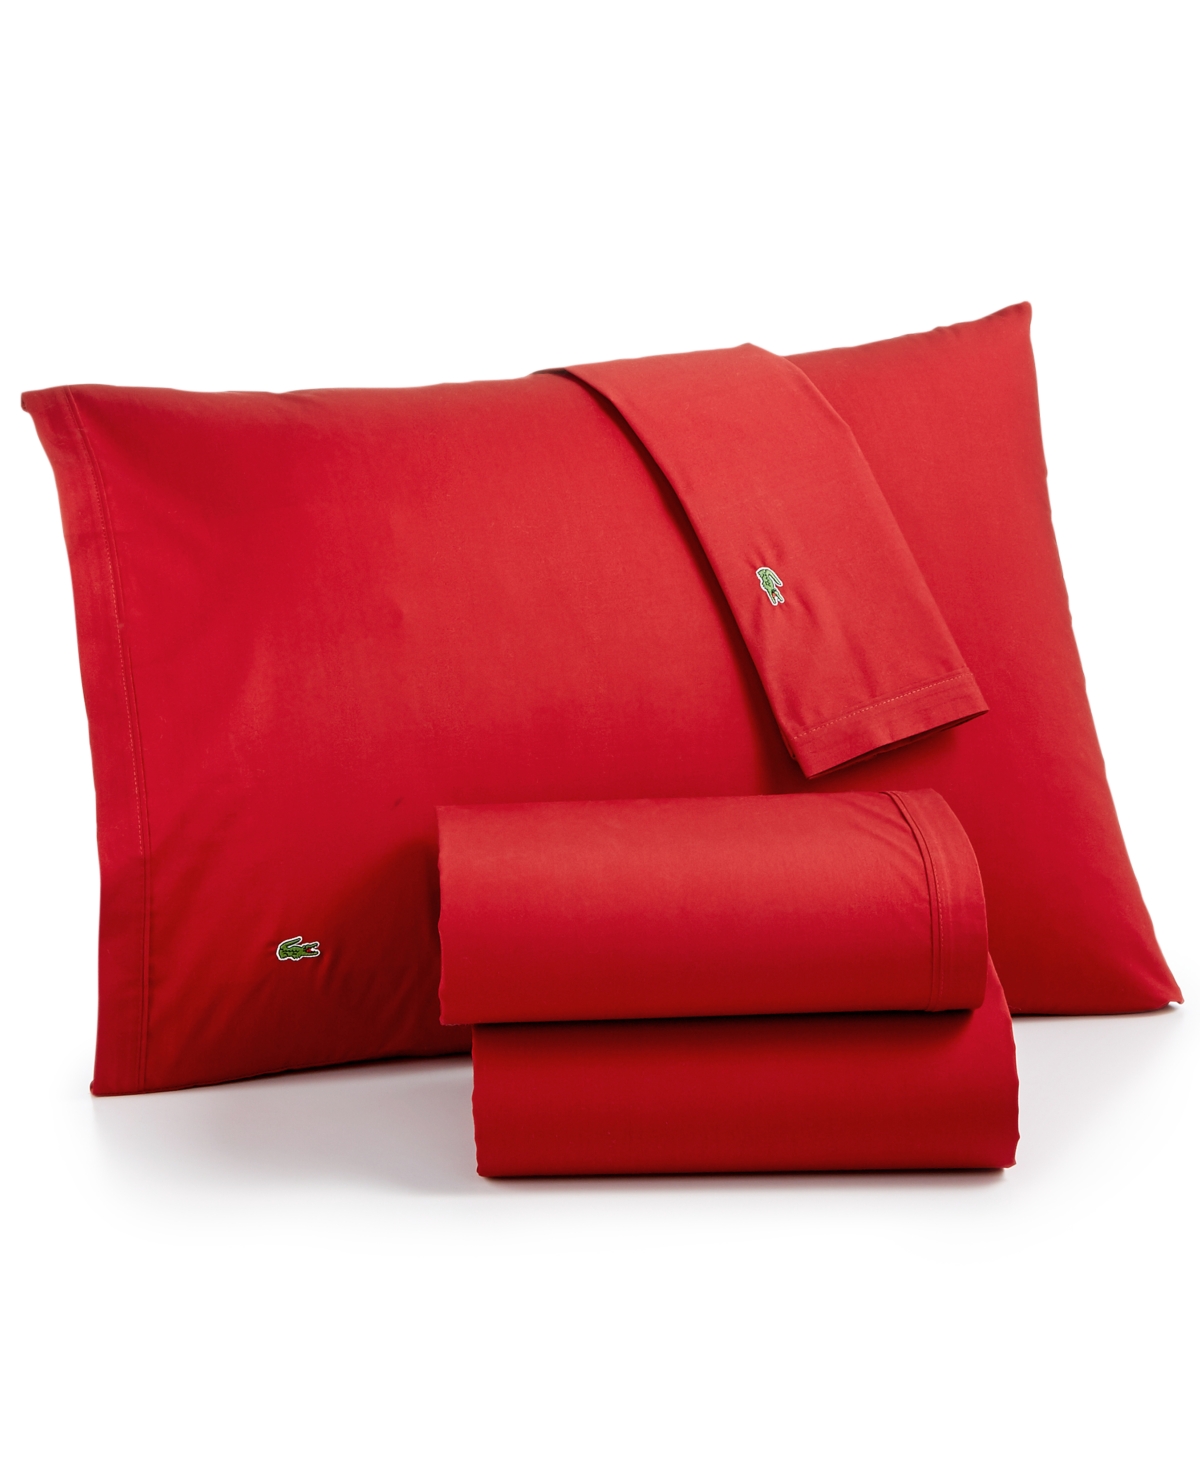 Lacoste Home Solid Cotton Percale Pillowcase Pair, Standard In Chili Pepper